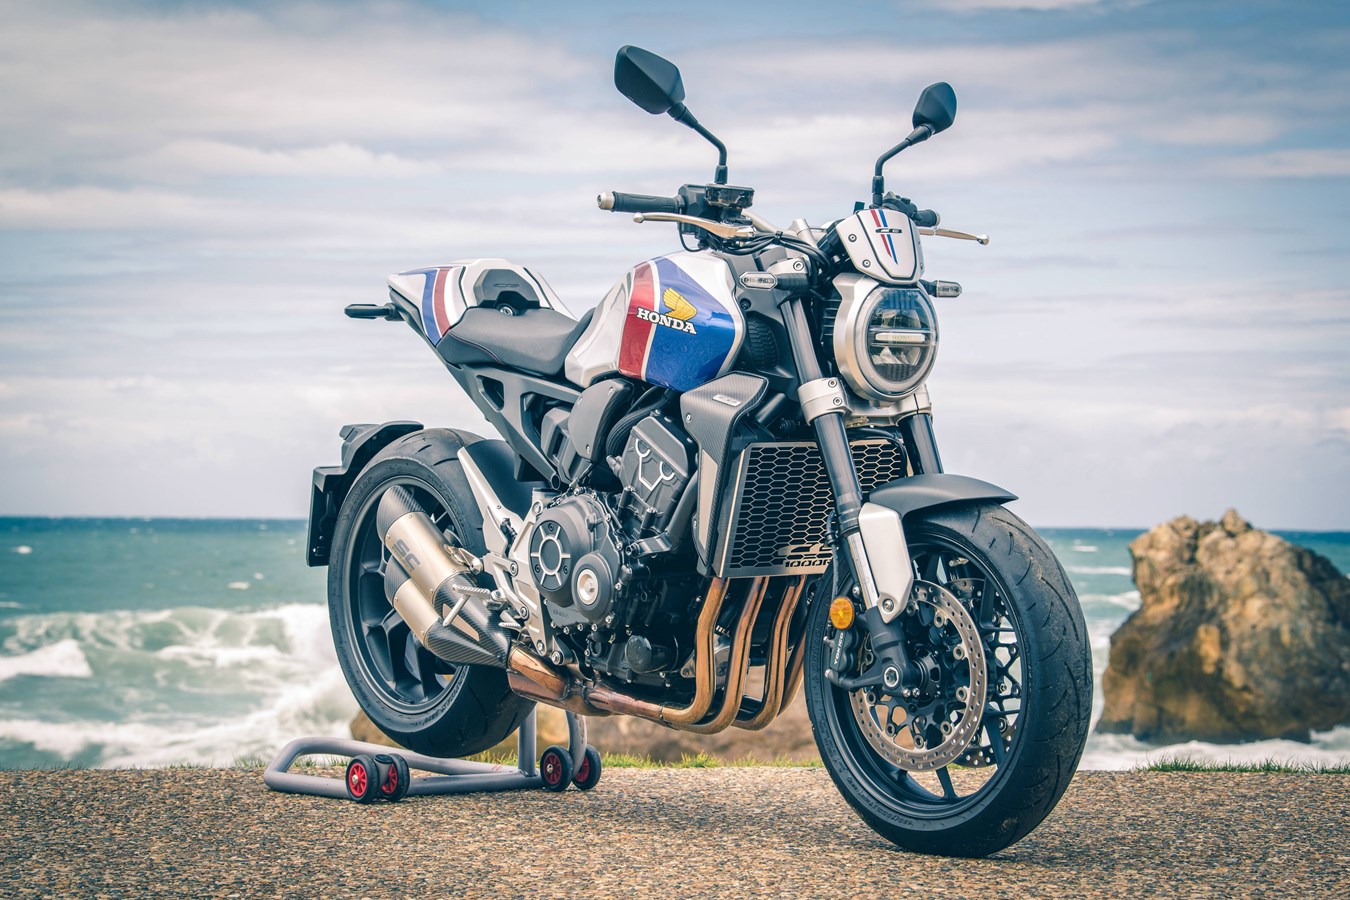 A Dozen Customized Cb1000rs At Wheels And Waves 2019